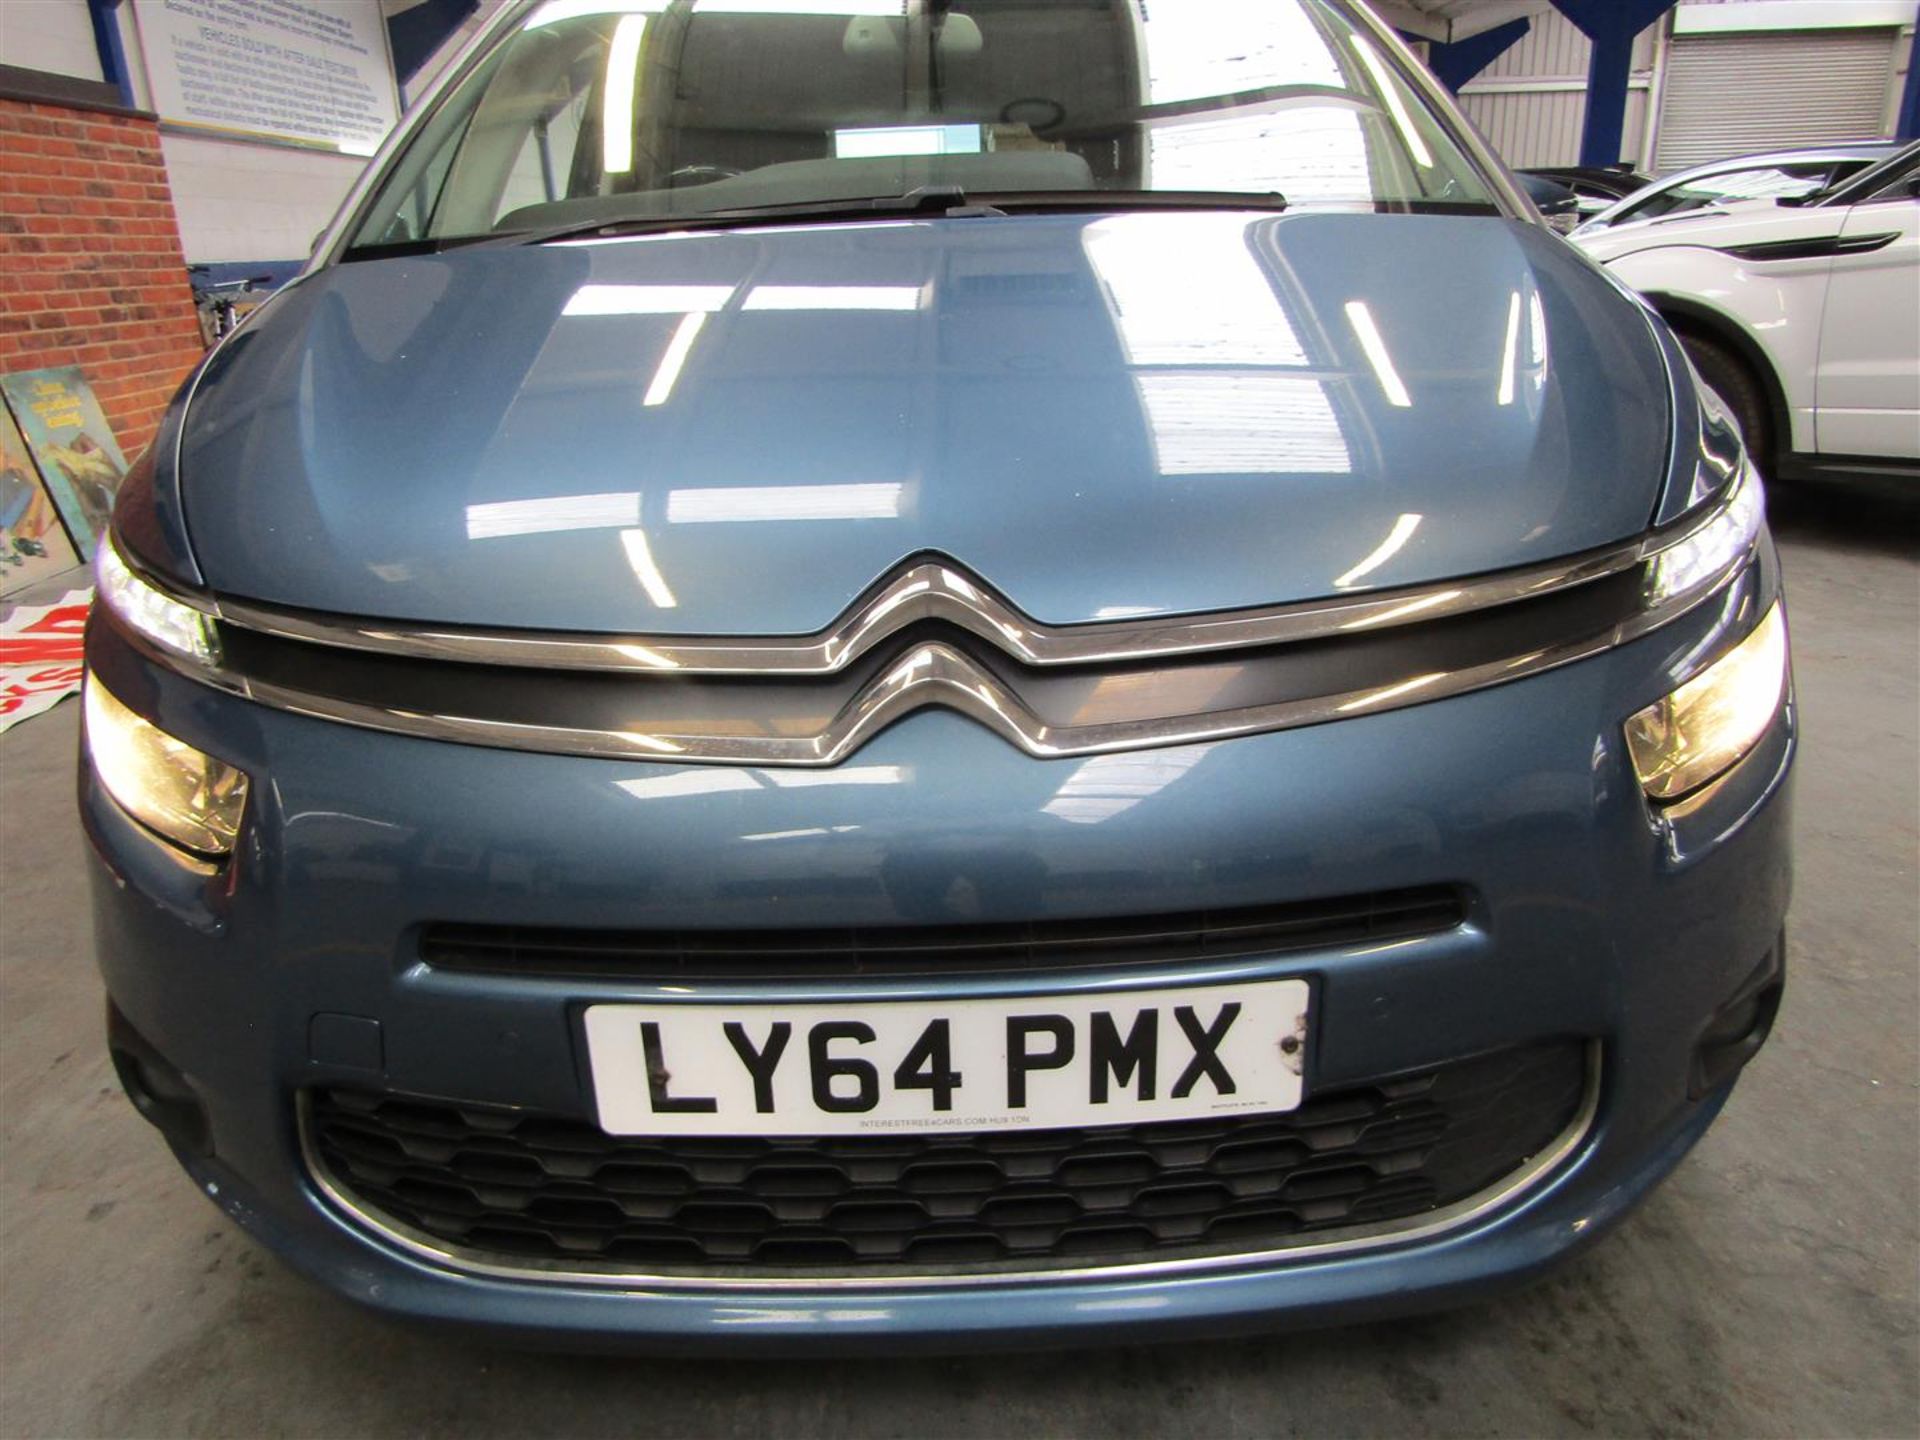 64 15 Citroen C4 Gr Picasso Excl - Image 2 of 25